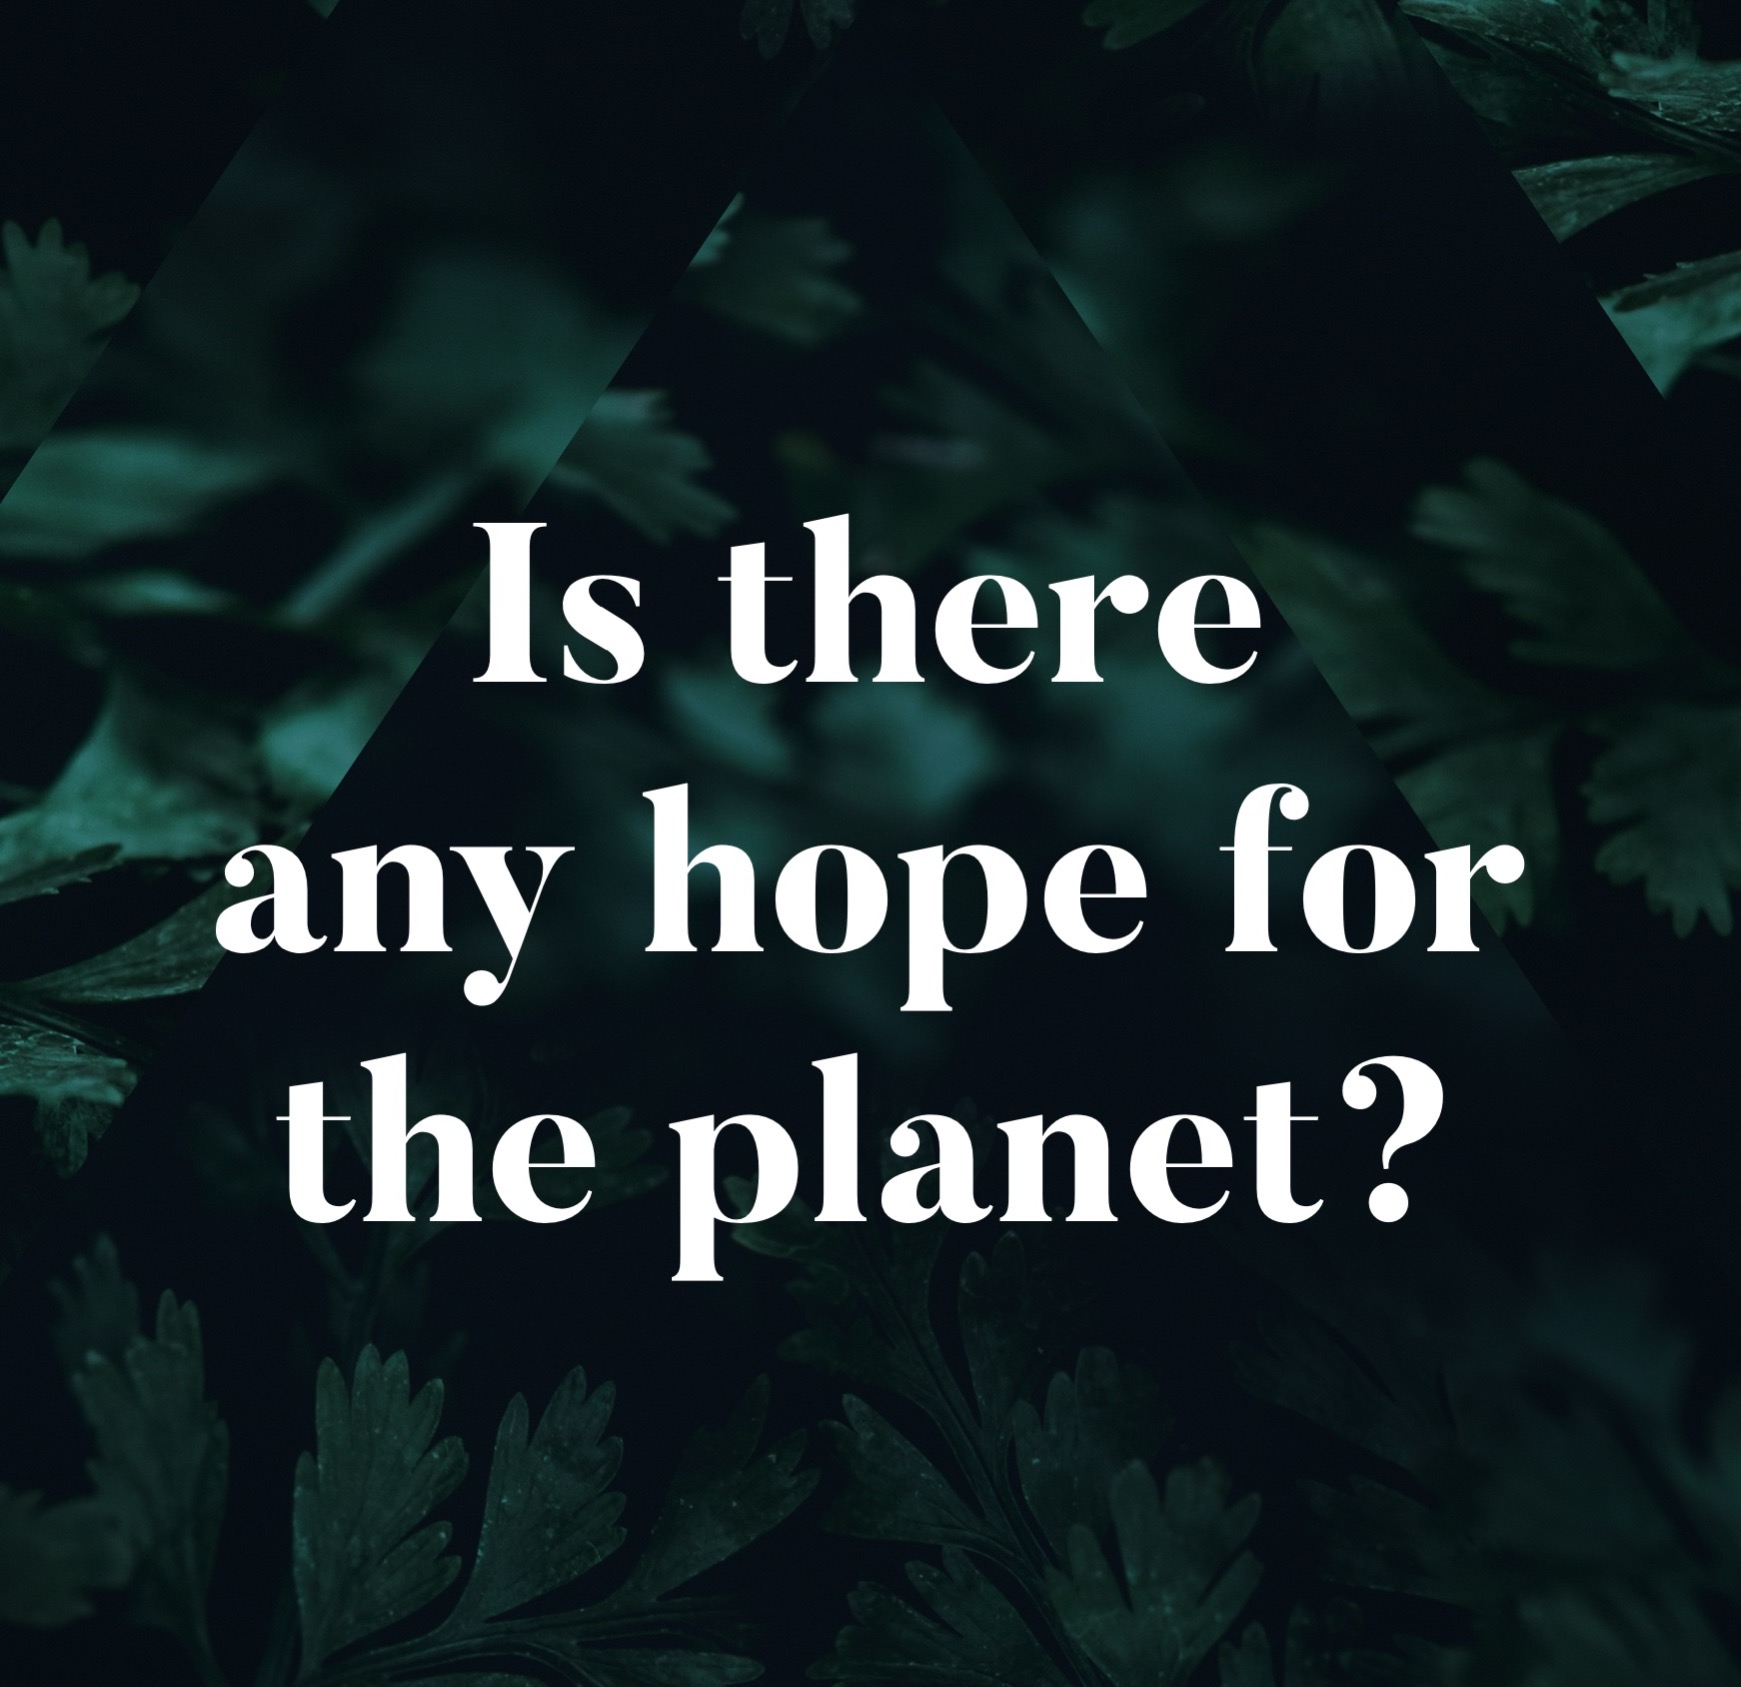 Is there any hope for the planet?